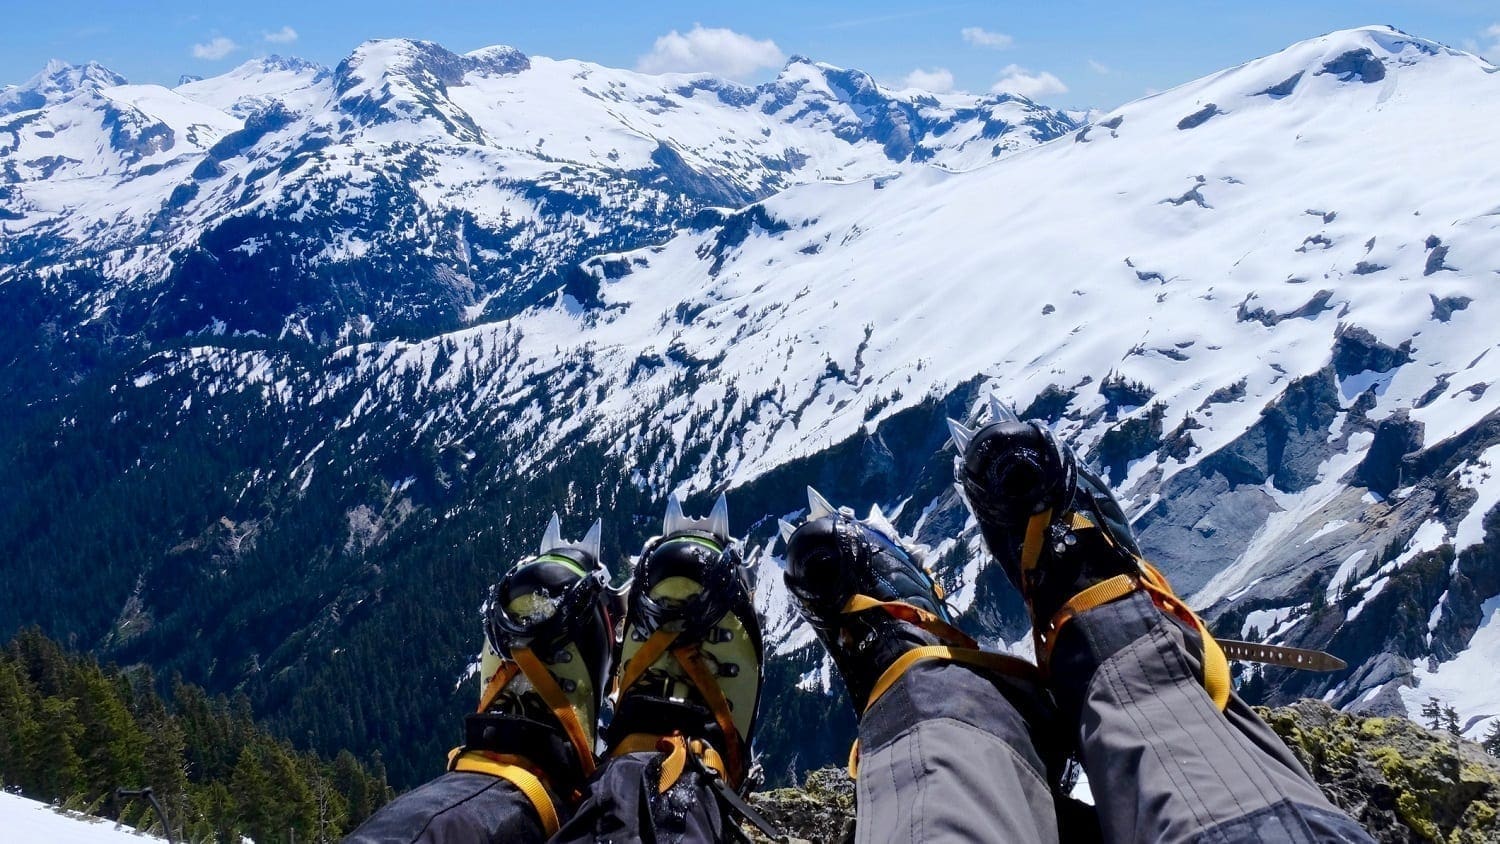 Crampone-clad feet in front of a view of snow covered North Cascade Mountains: Photo 73296343 © Aquamarine4 | Dreamstime.com